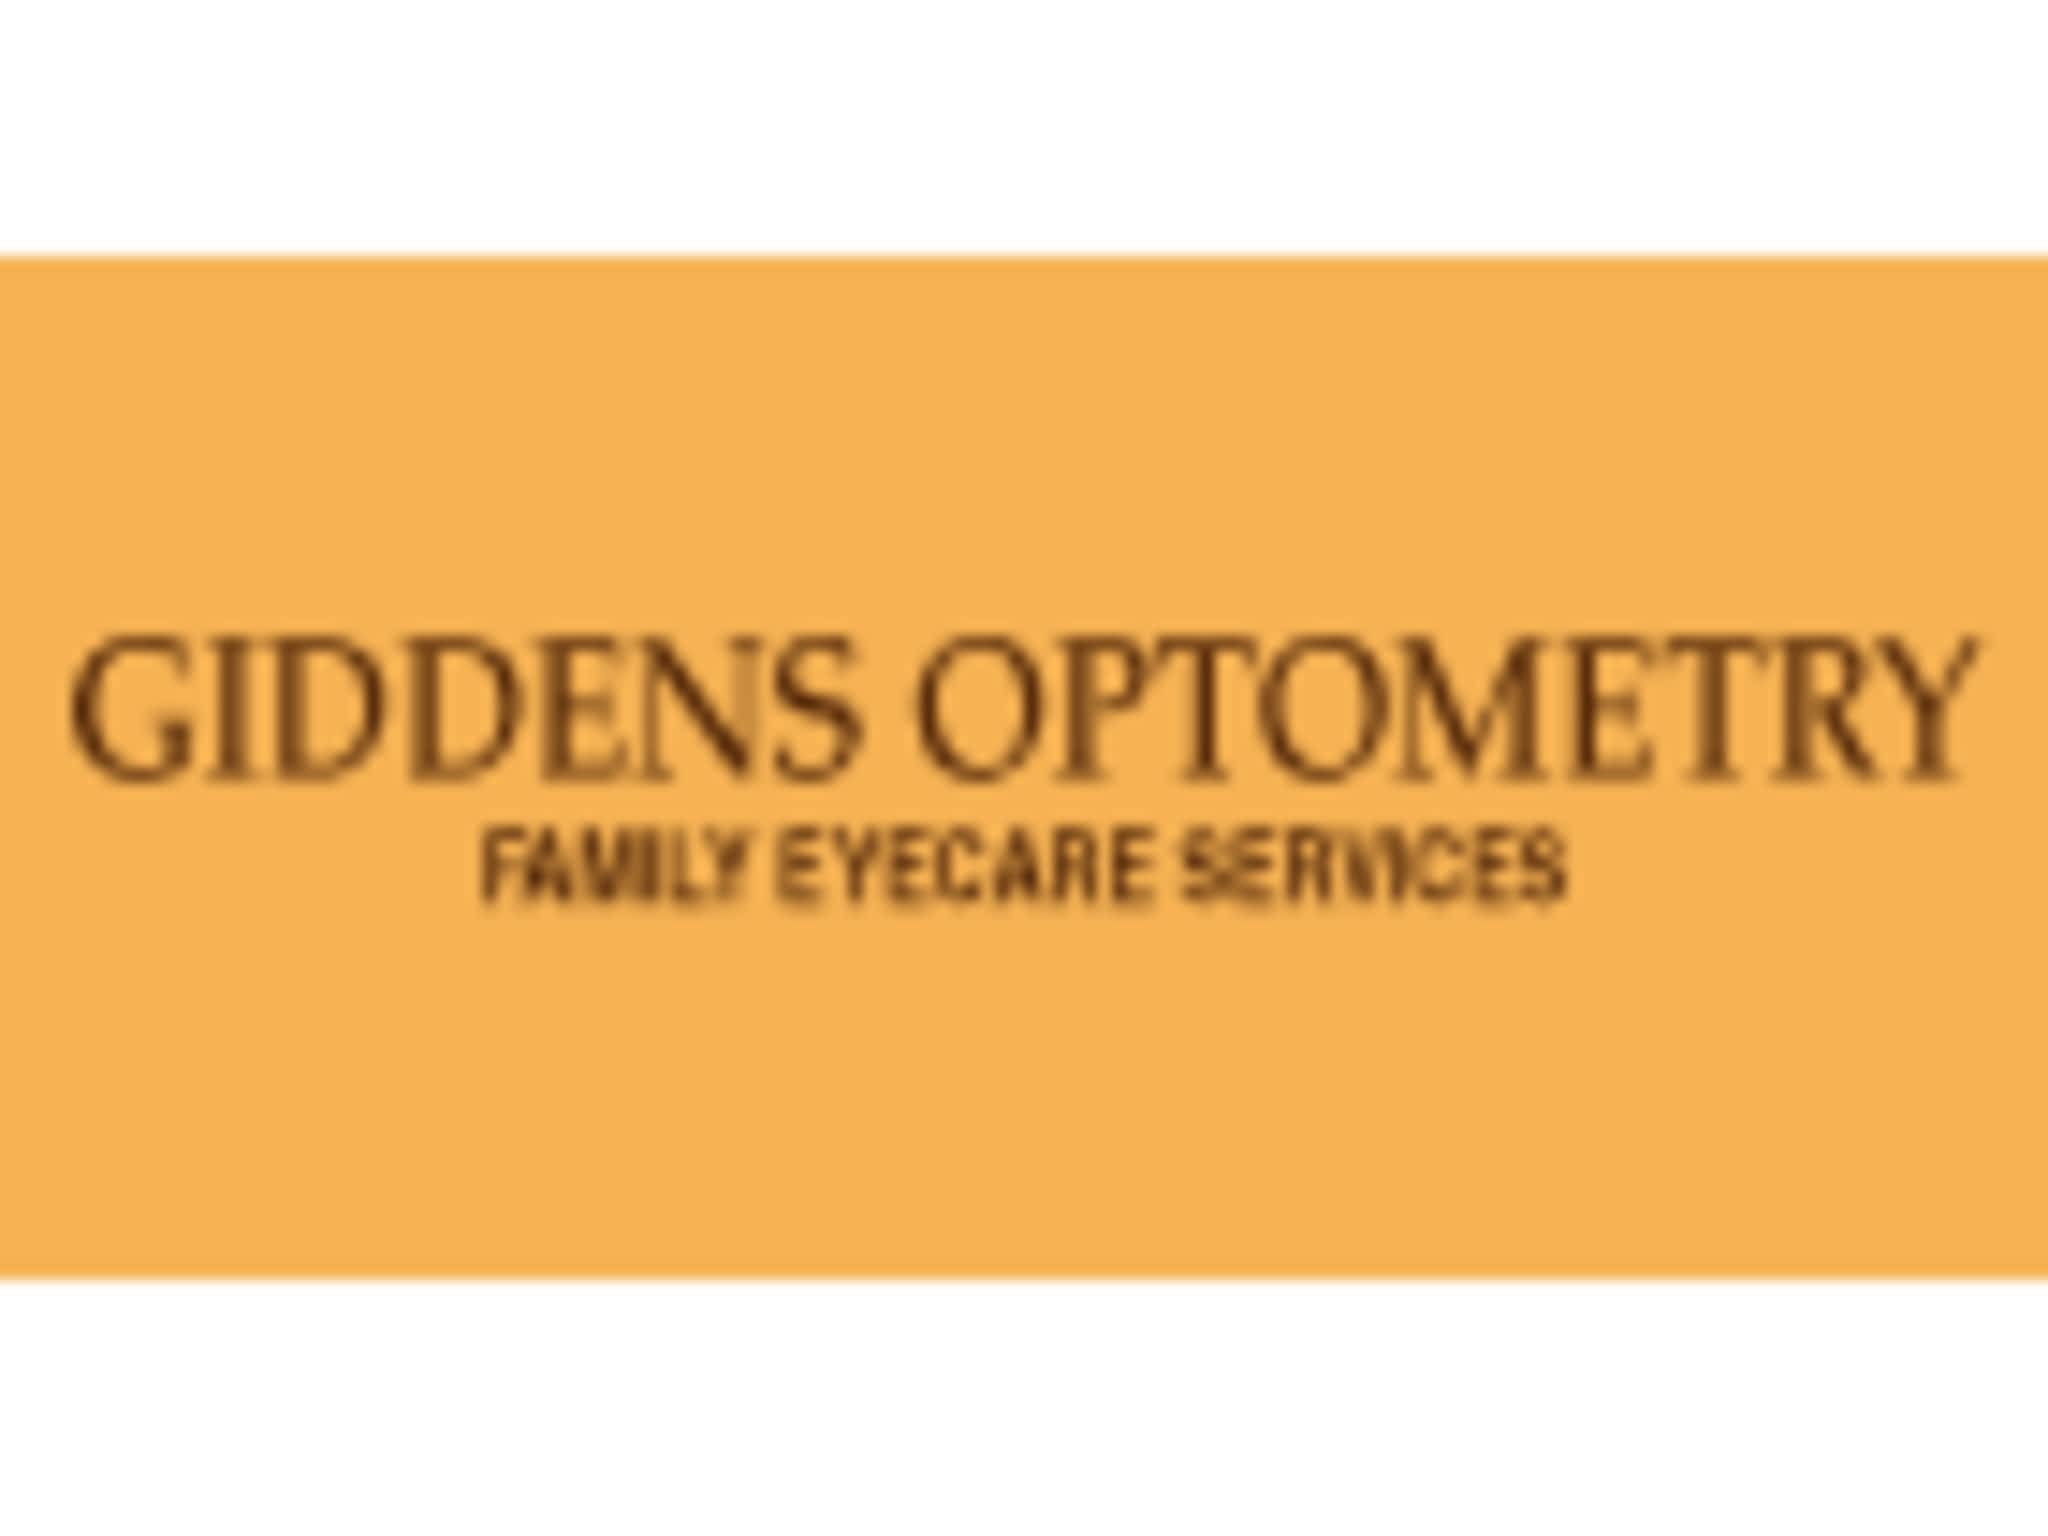 photo Giddens Optometry Family Eye Care Services